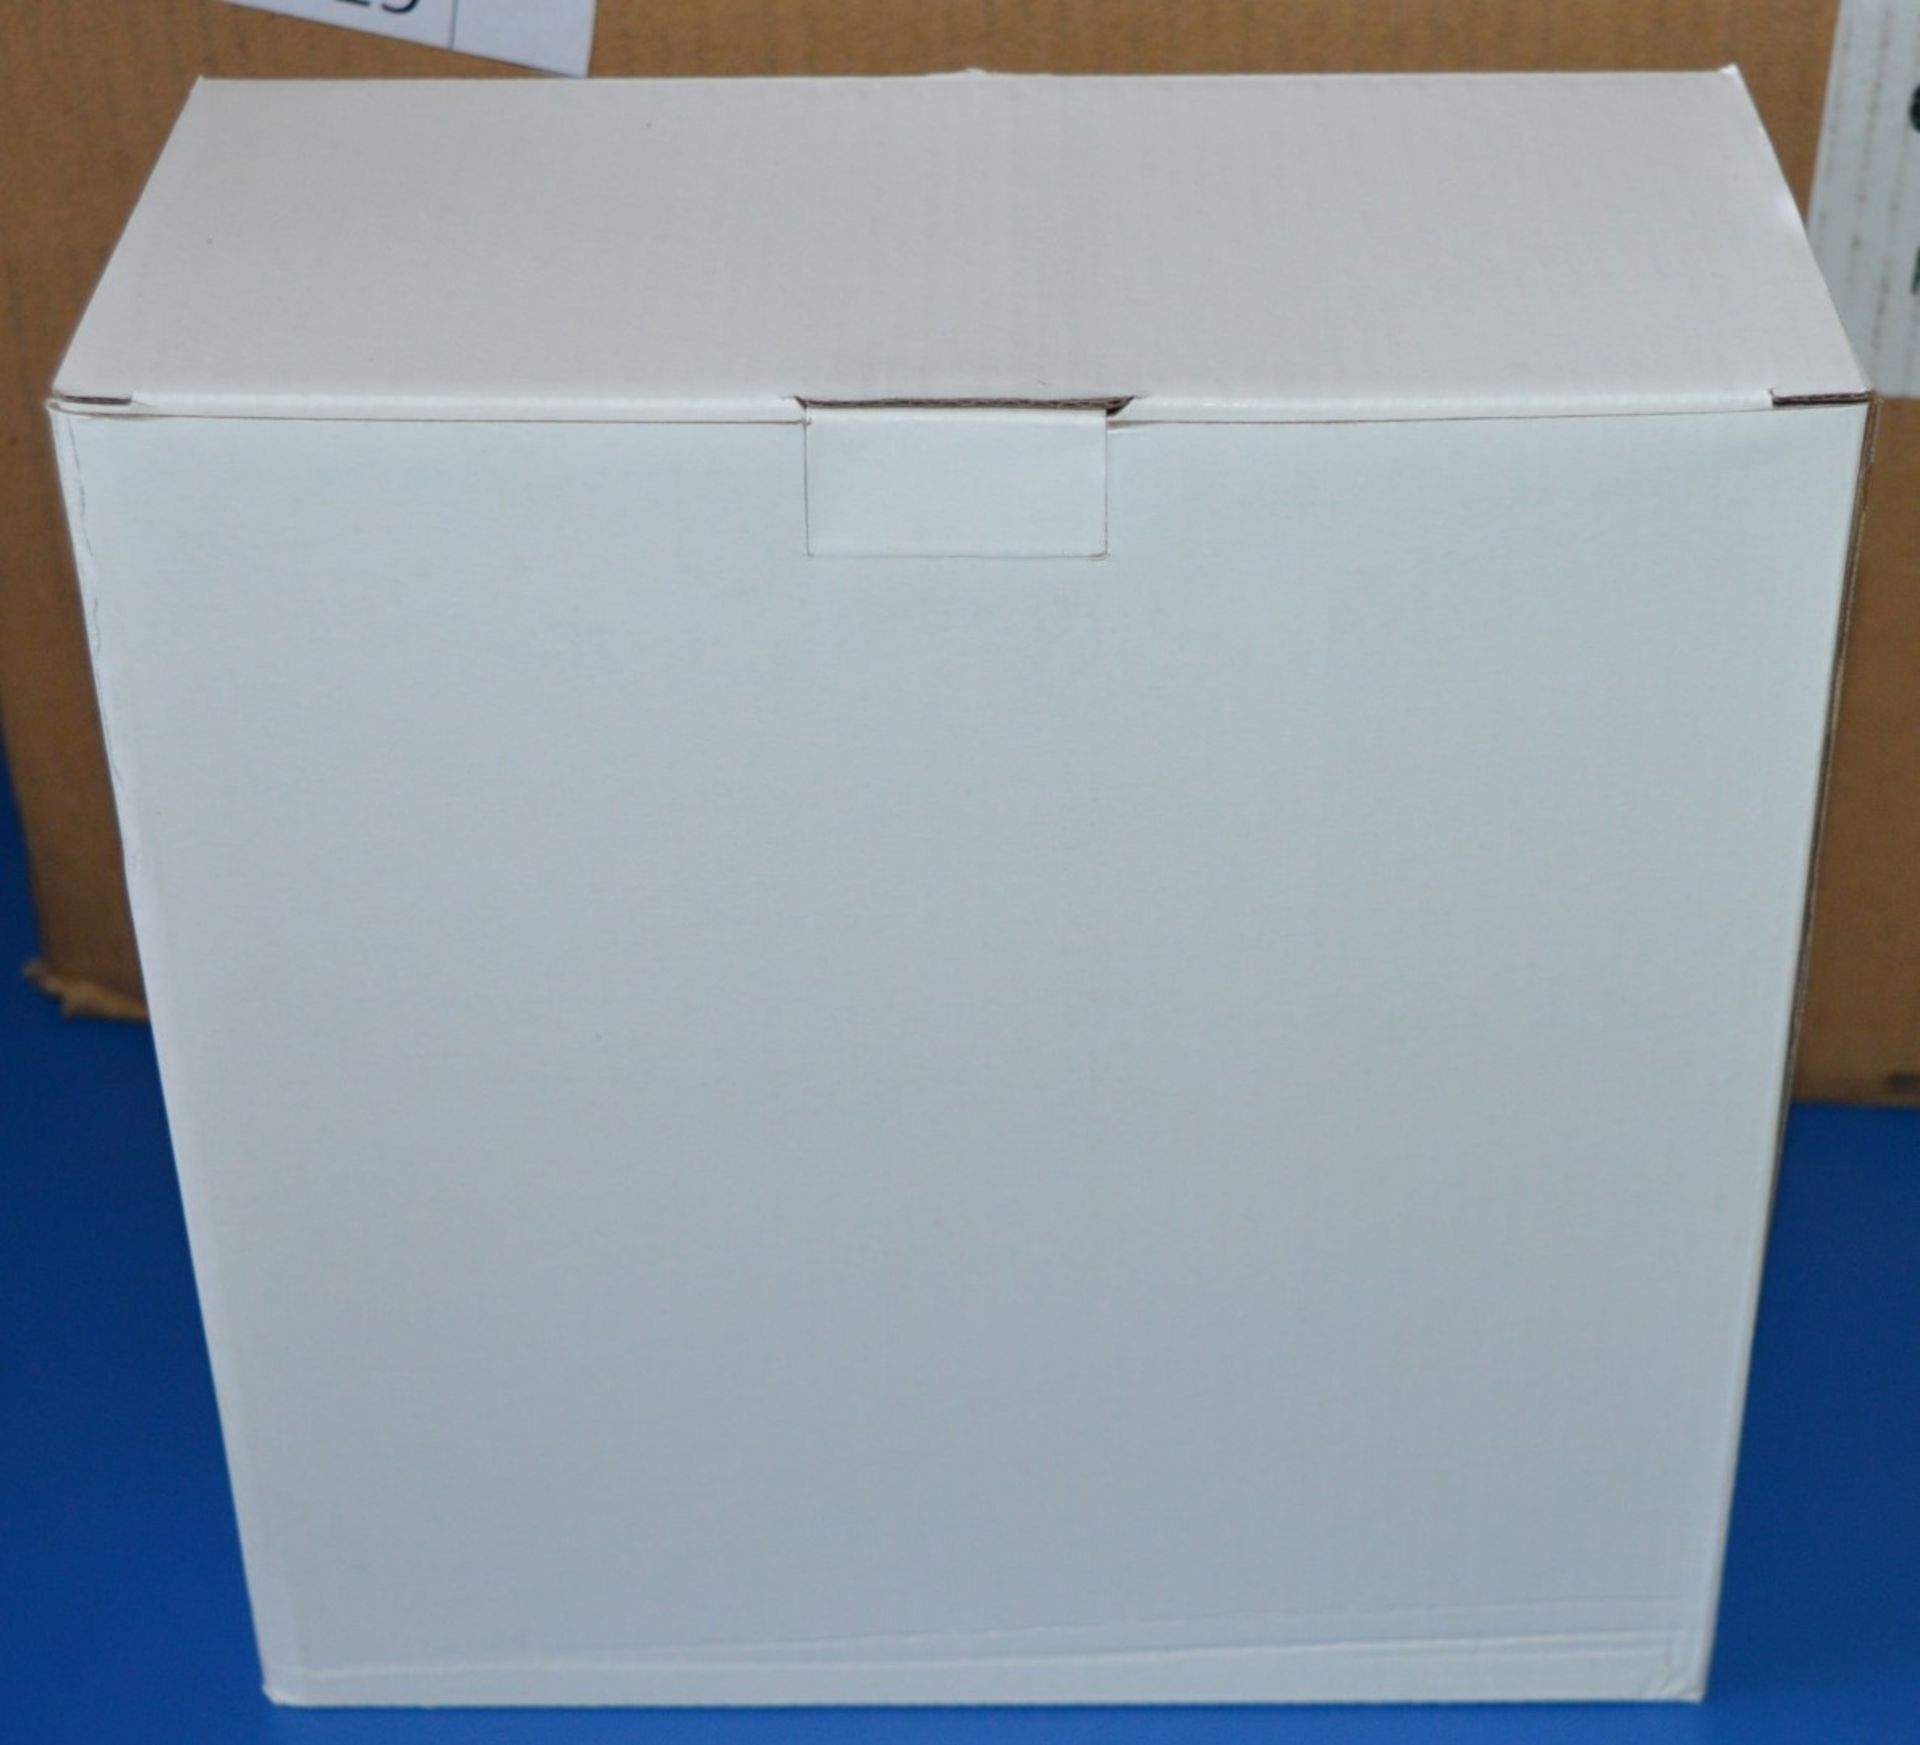 1 x Under Till Security Cash Safe Box For Bank Notes - Keep Money Secure From Robbery and Theft - - Image 3 of 5